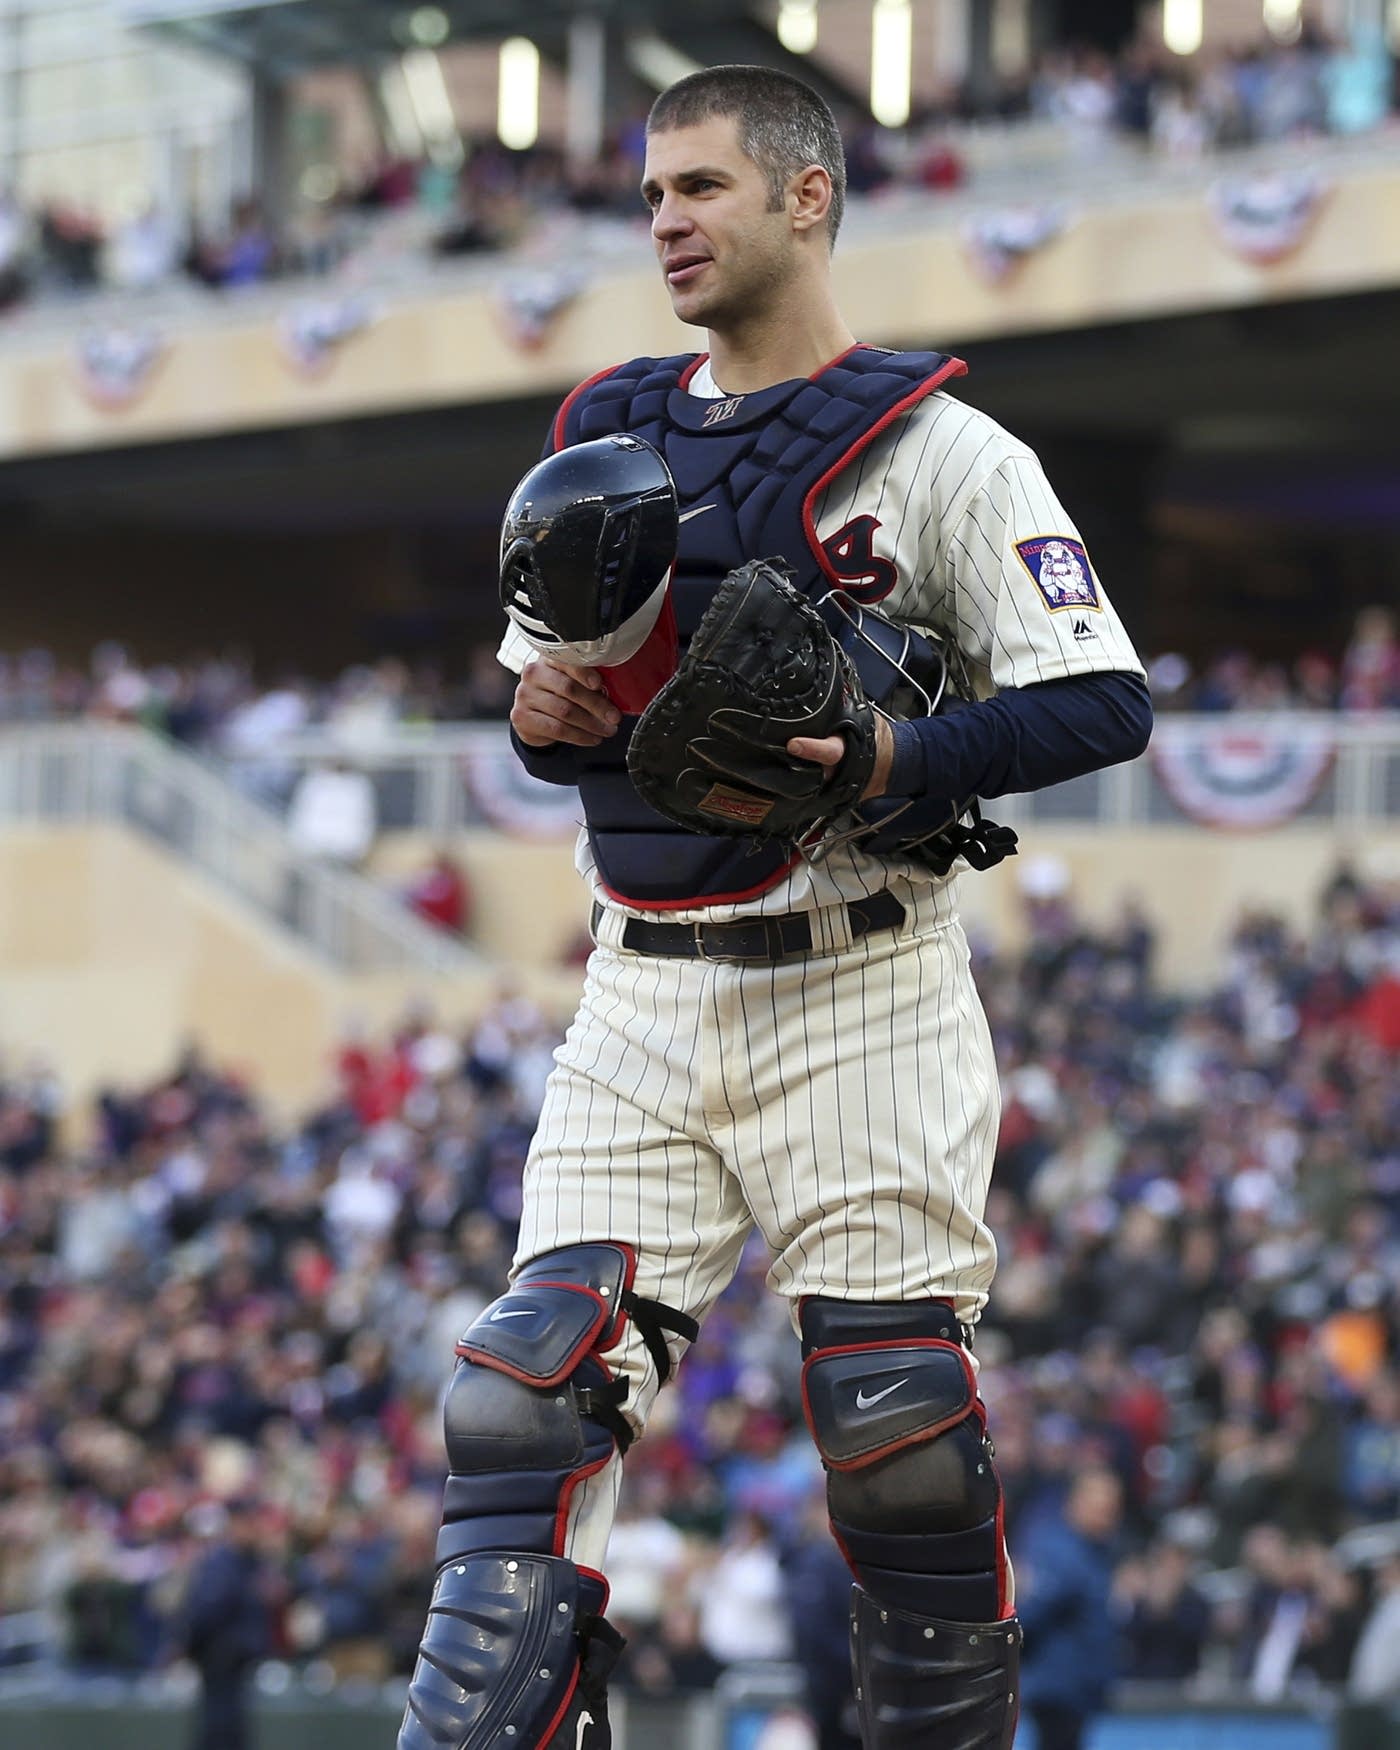 Joe Mauer catching during his last game